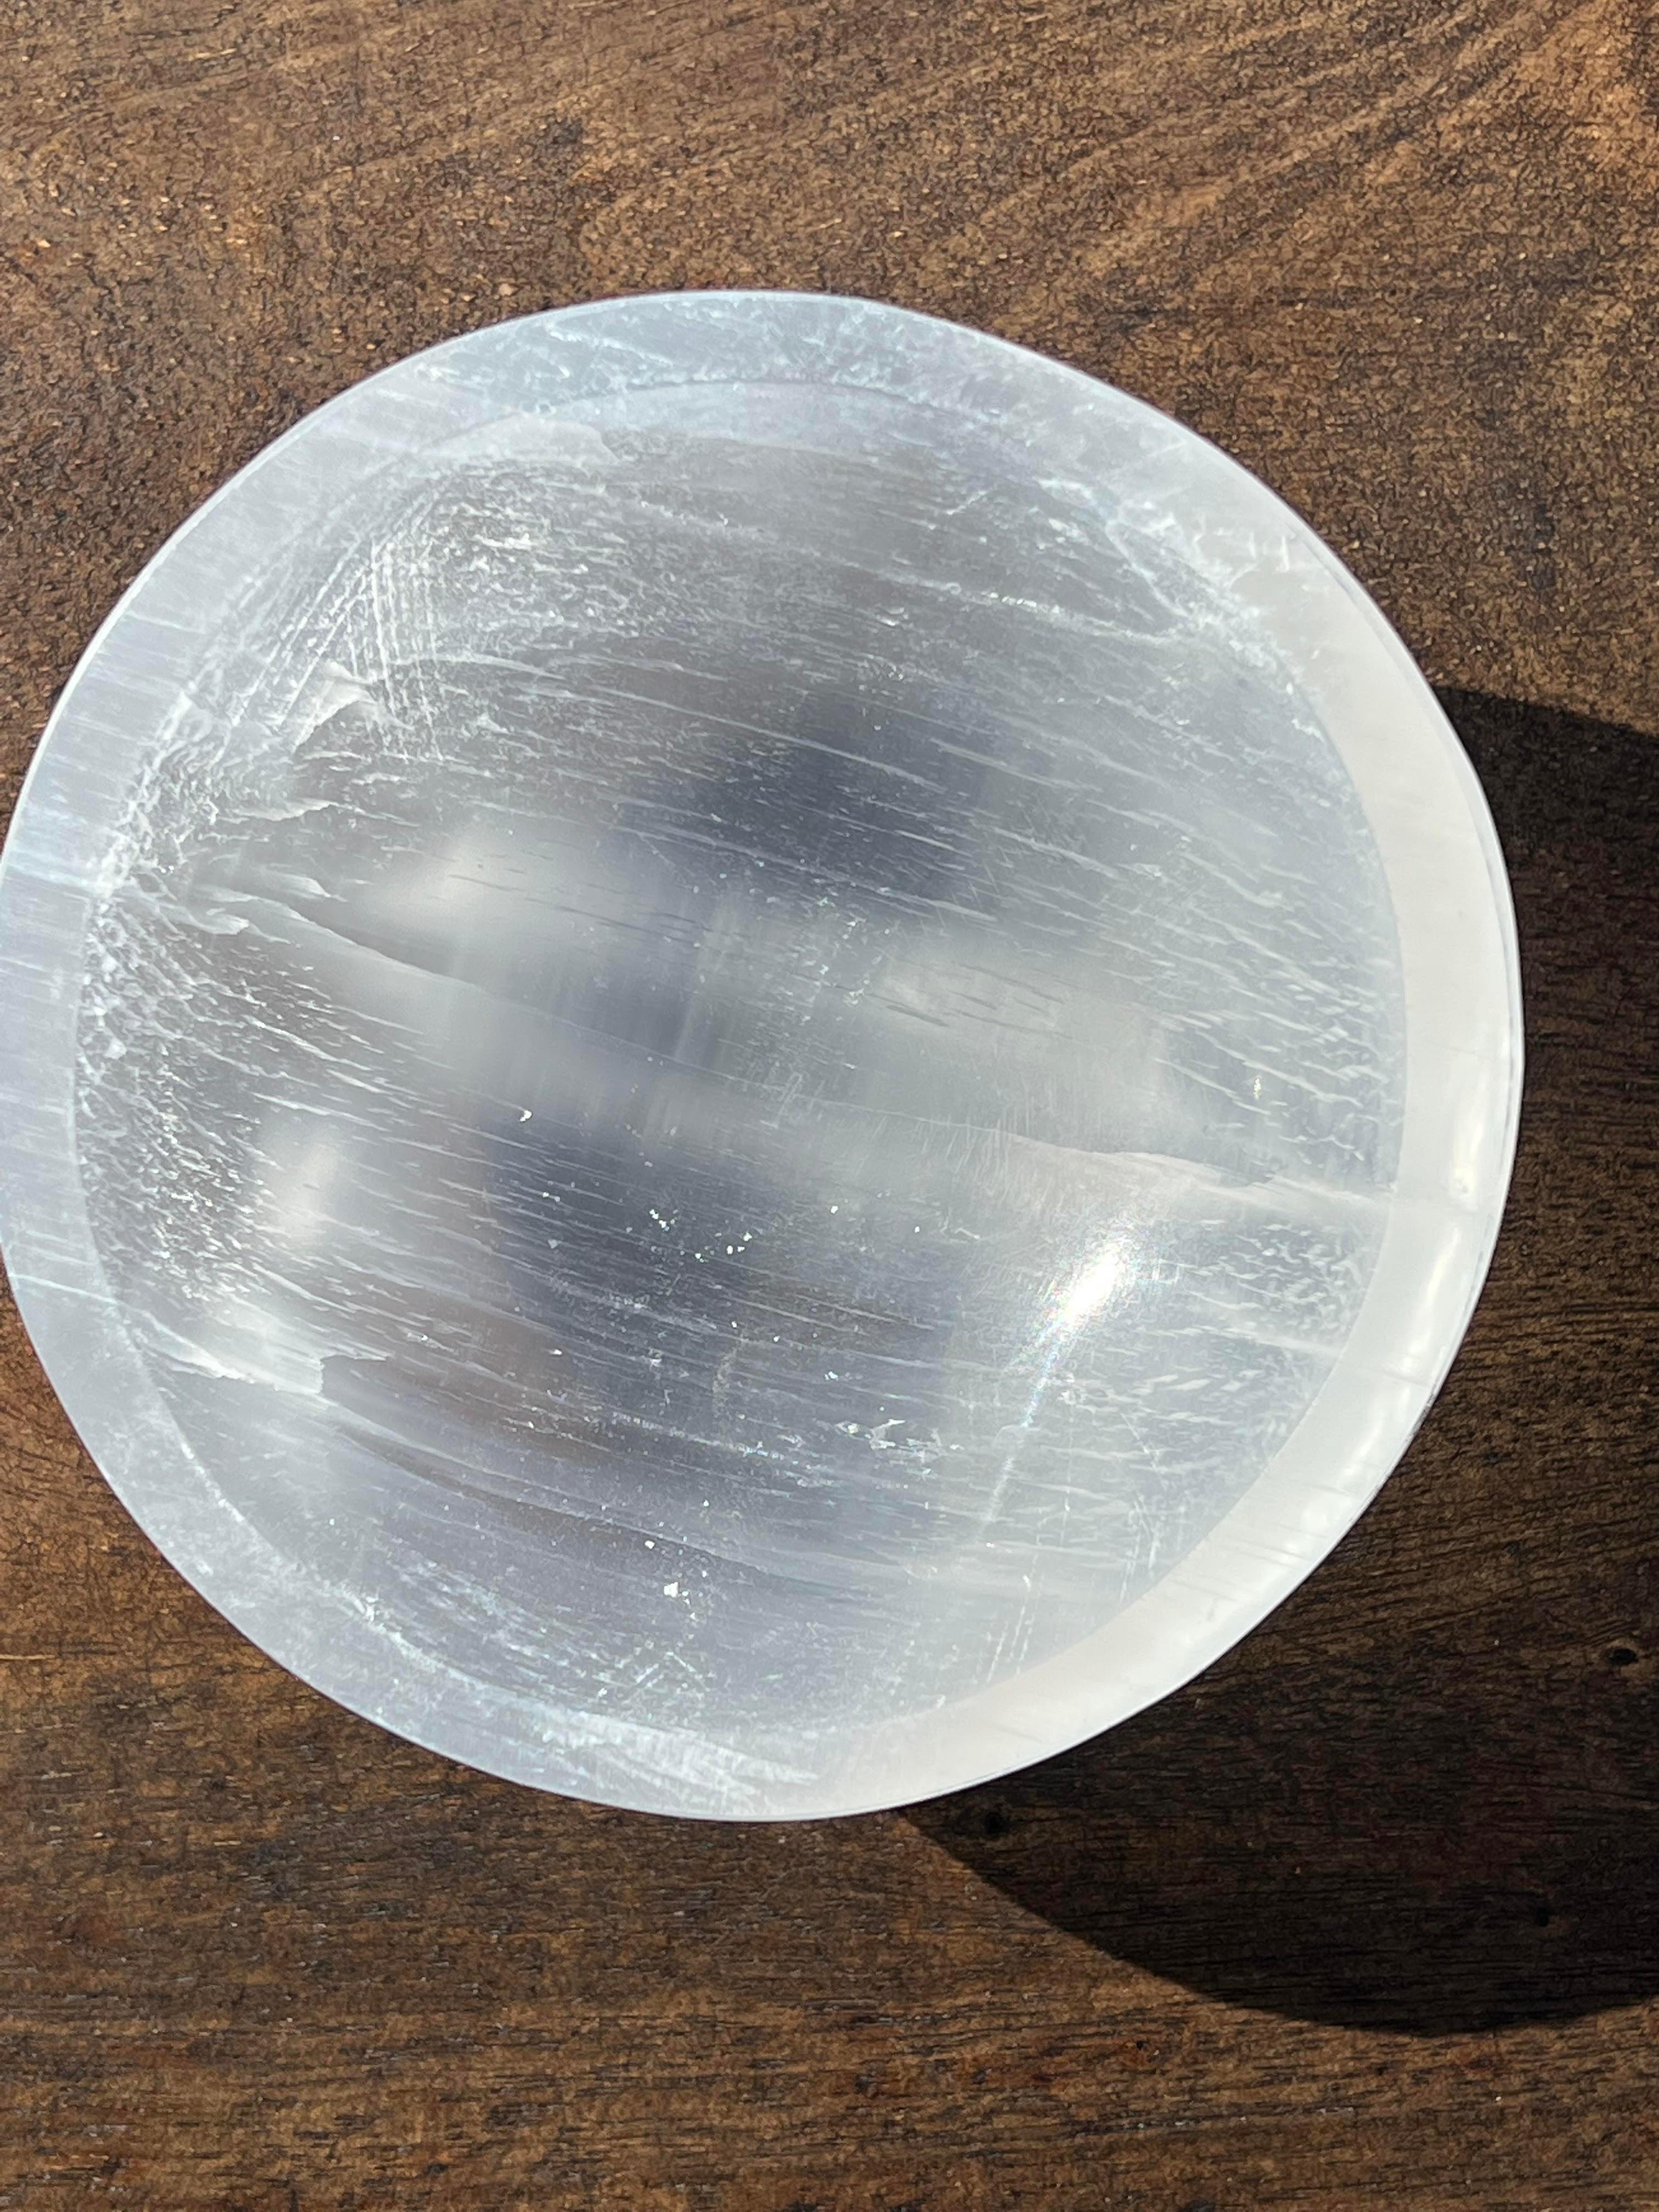 High Quality Hand Carved Natural Gypsum Circular Shape Bowl Healing Ability Selenite Bowls Crystals Stone With 7 Stone Chakra 925 Sterling Silver Chain Pendant - YoTreasure